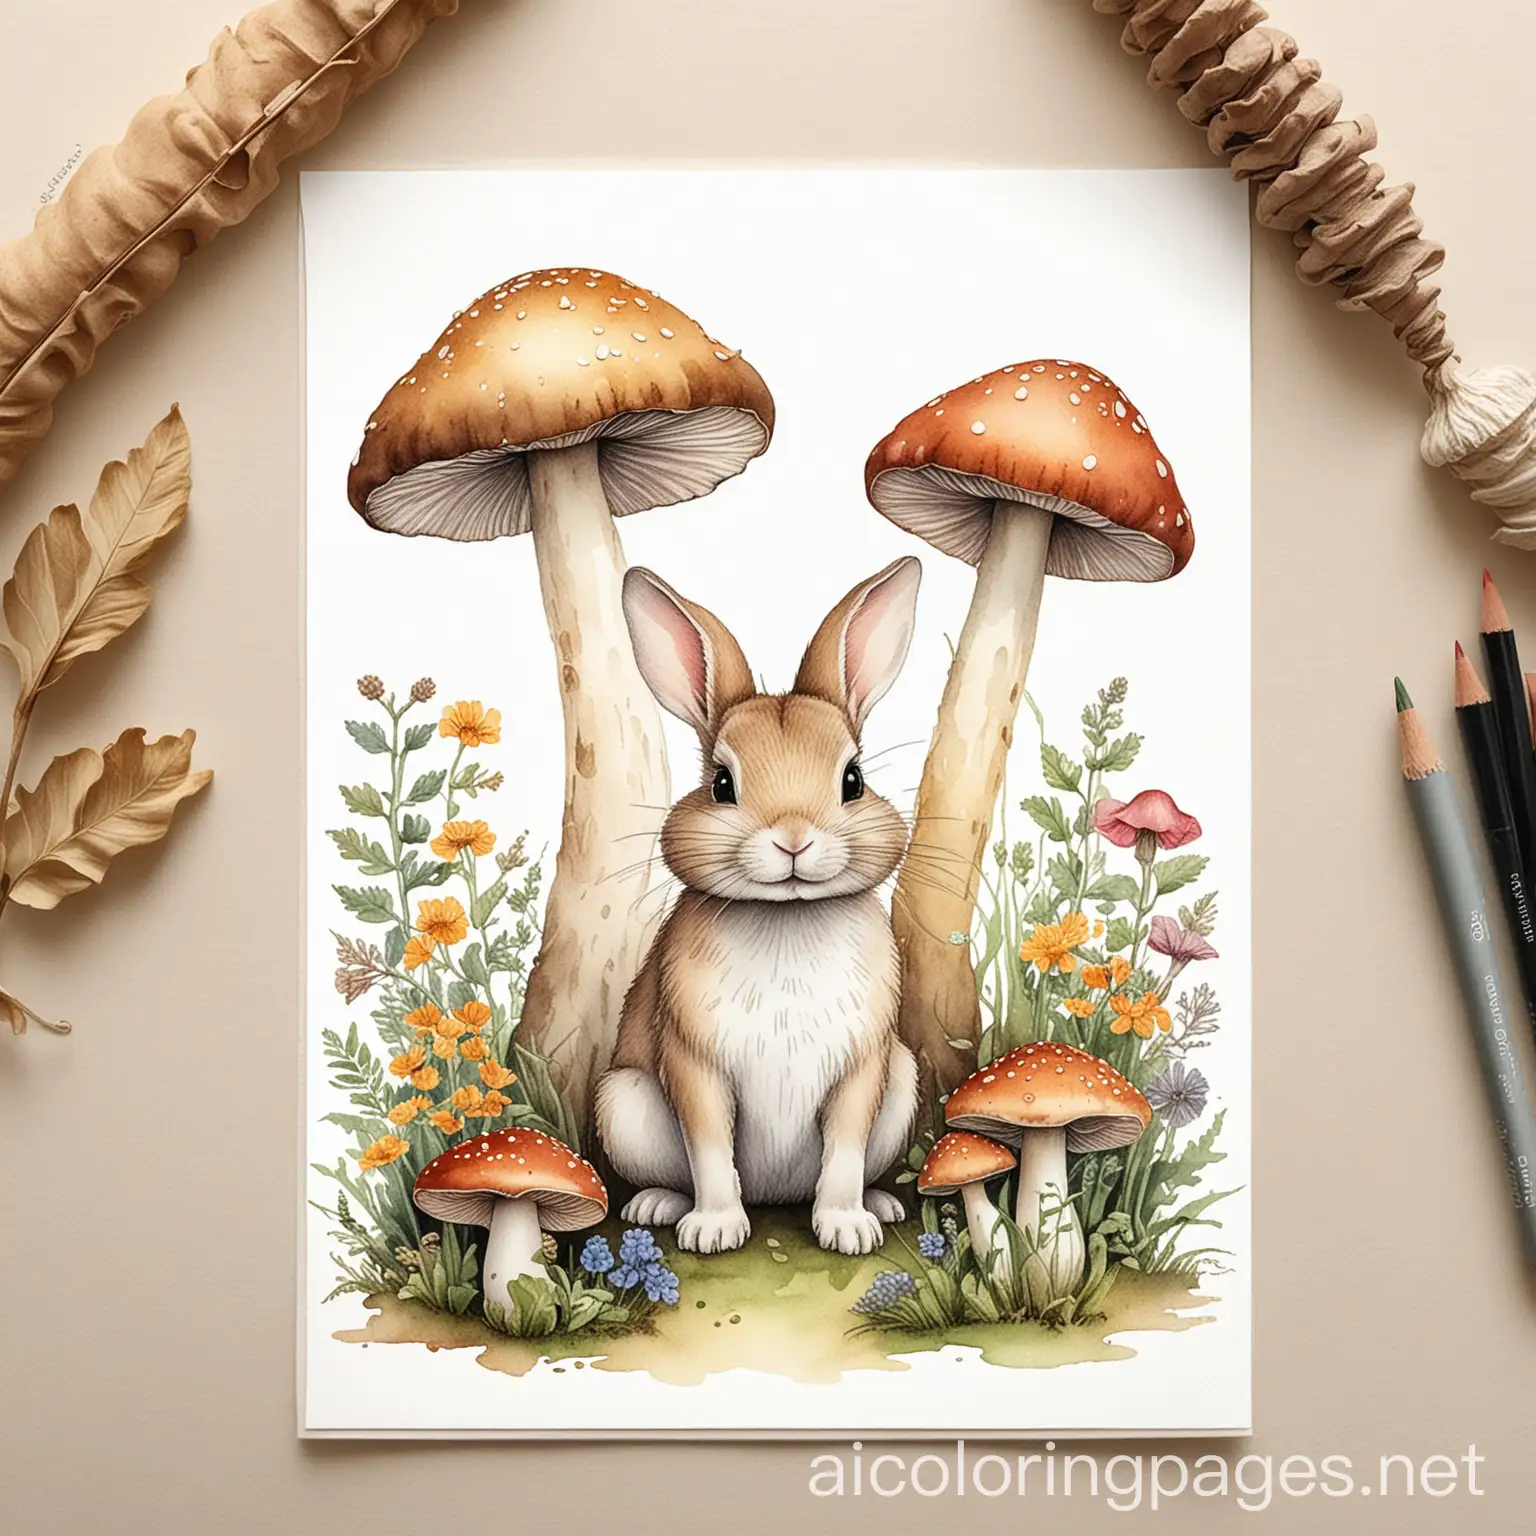 Vintage mushroom and bunny watercolor illustrations, Coloring Page, black and white, line art, white background, Simplicity, Ample White Space. The background of the coloring page is plain white to make it easy for young children to color within the lines. The outlines of all the subjects are easy to distinguish, making it simple for kids to color without too much difficulty